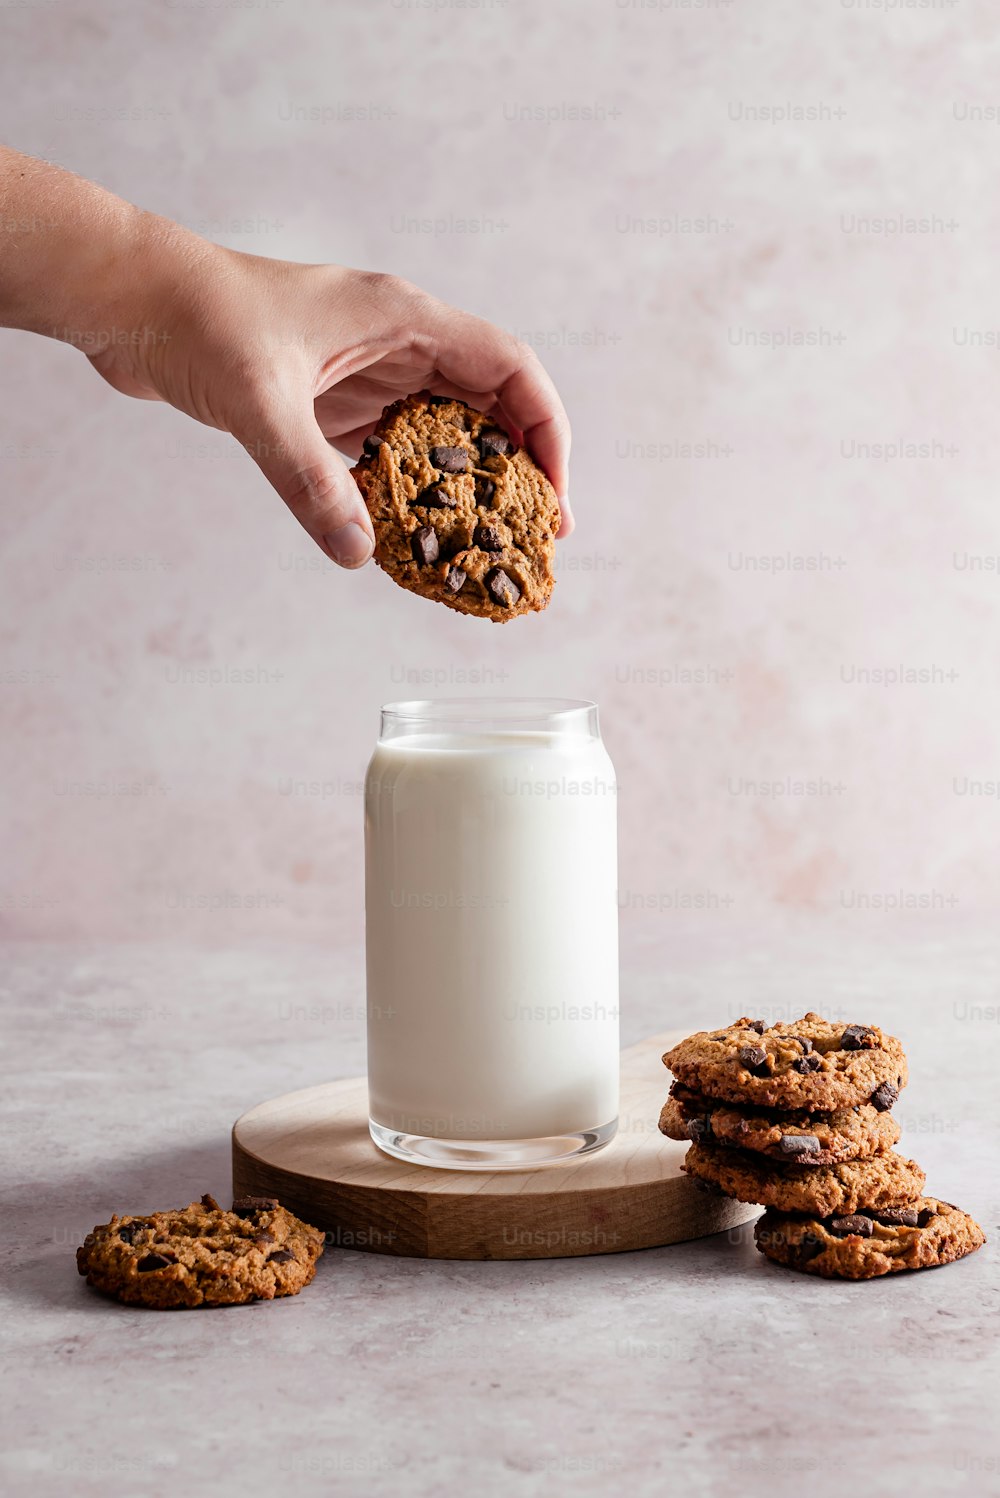 a person holding a cookie over a glass of milk